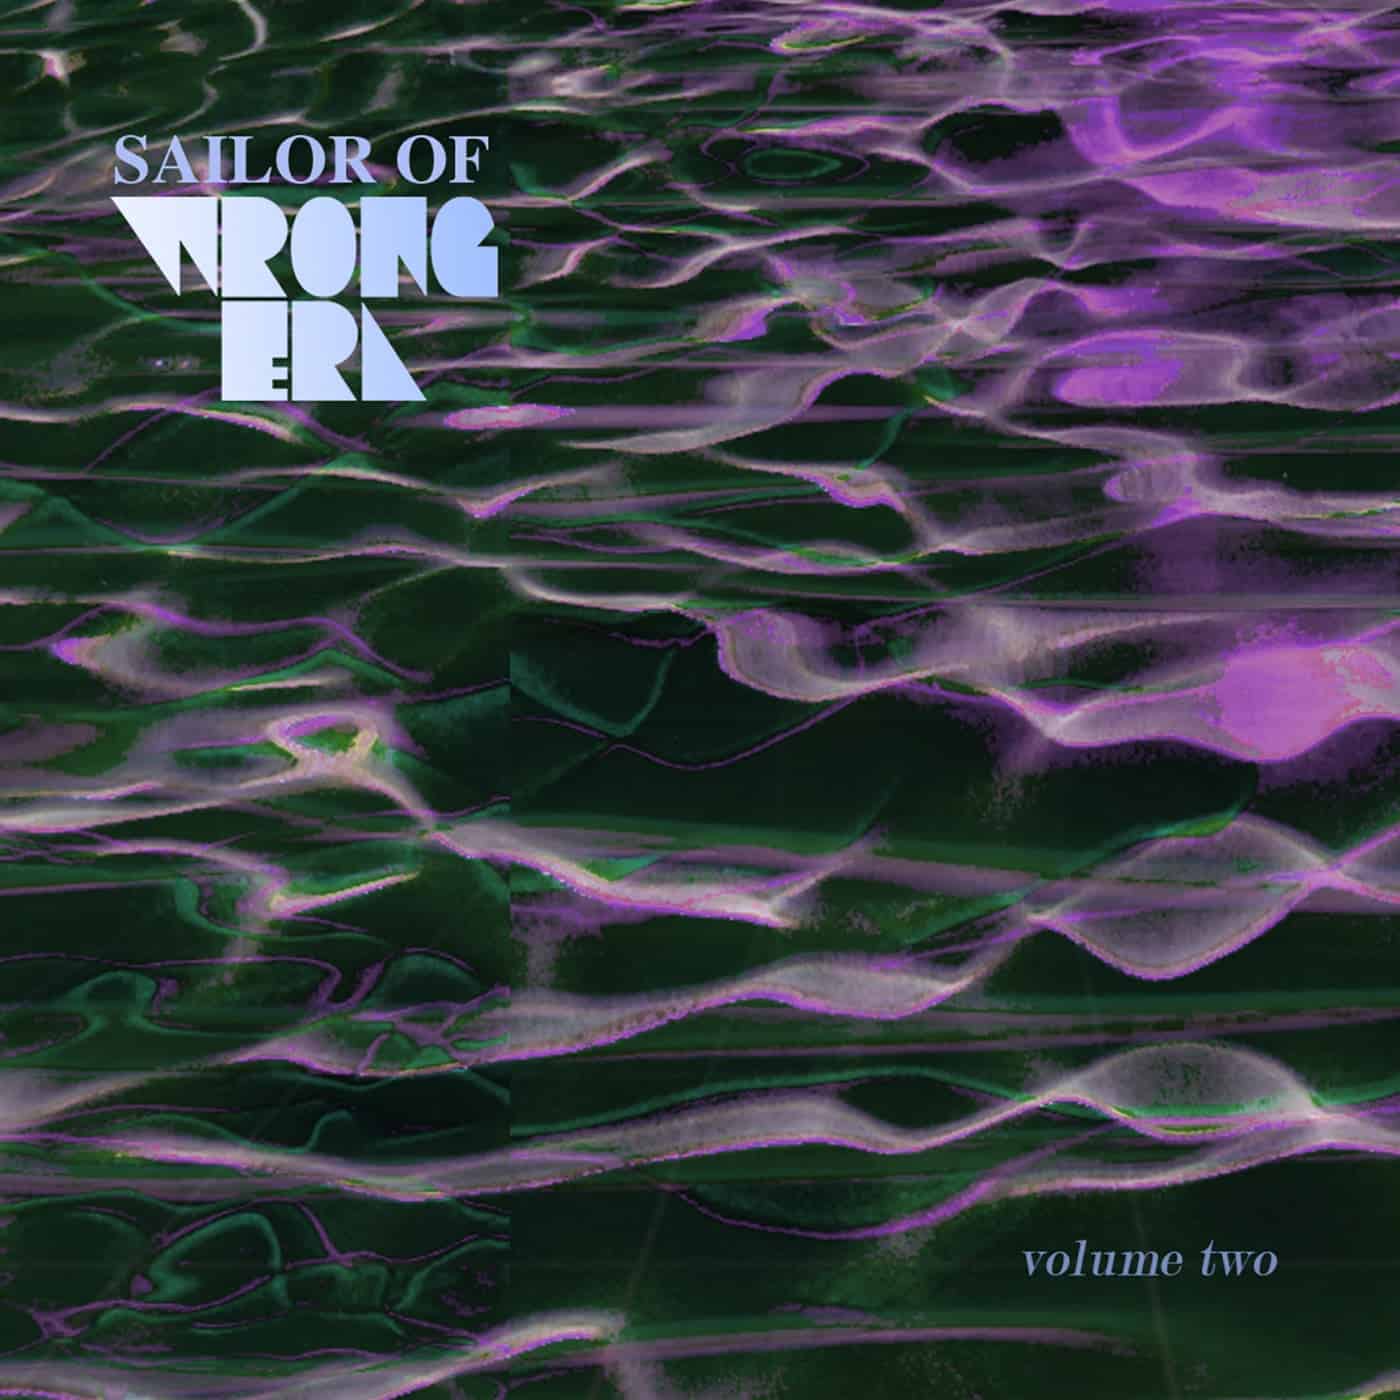 Download Sailor Of Wrong Era Volume Two on Electrobuzz